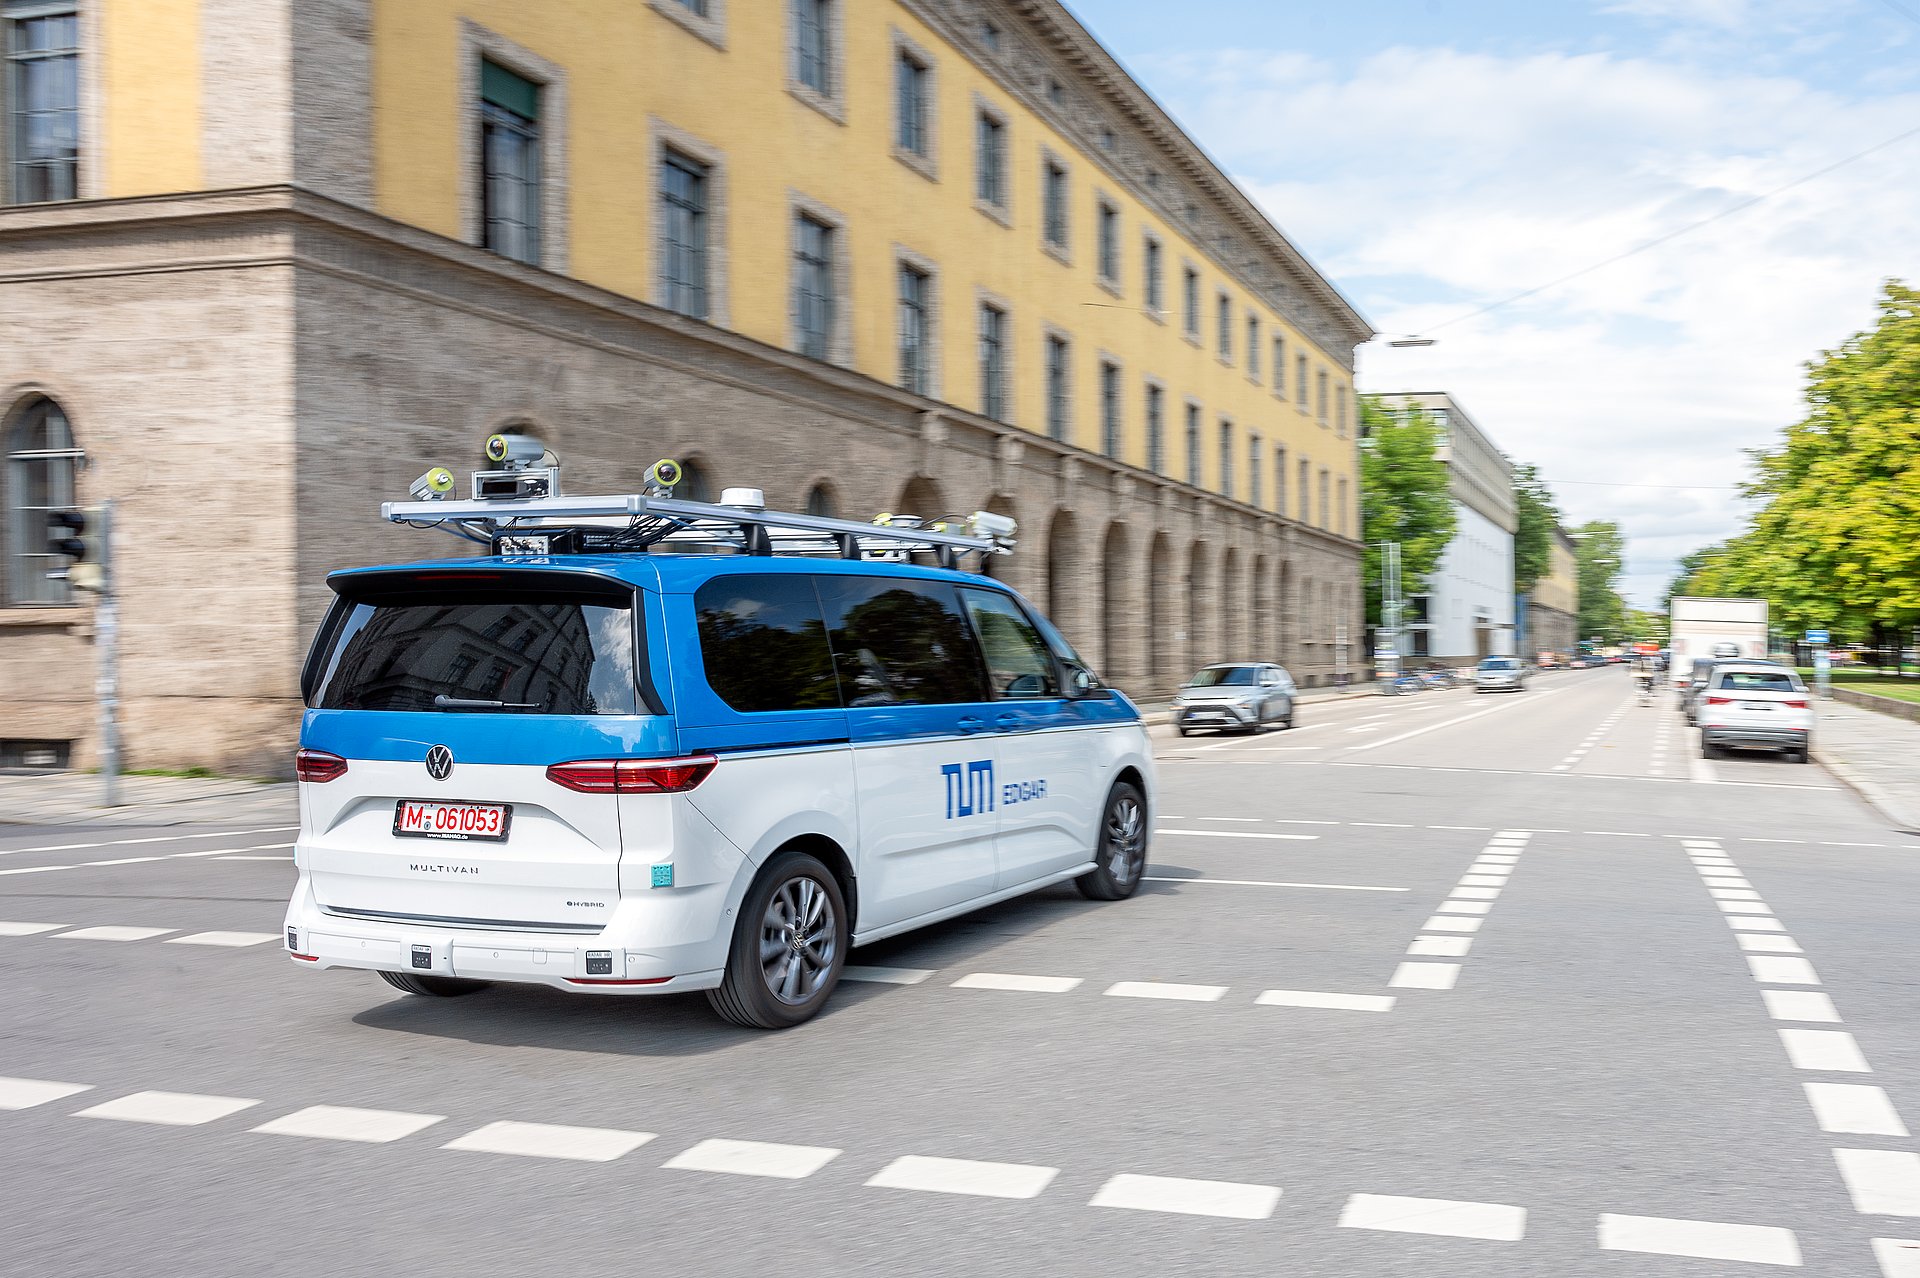 A minibus with roof attachments and sensor technology for autonomous driving drives through Munich.